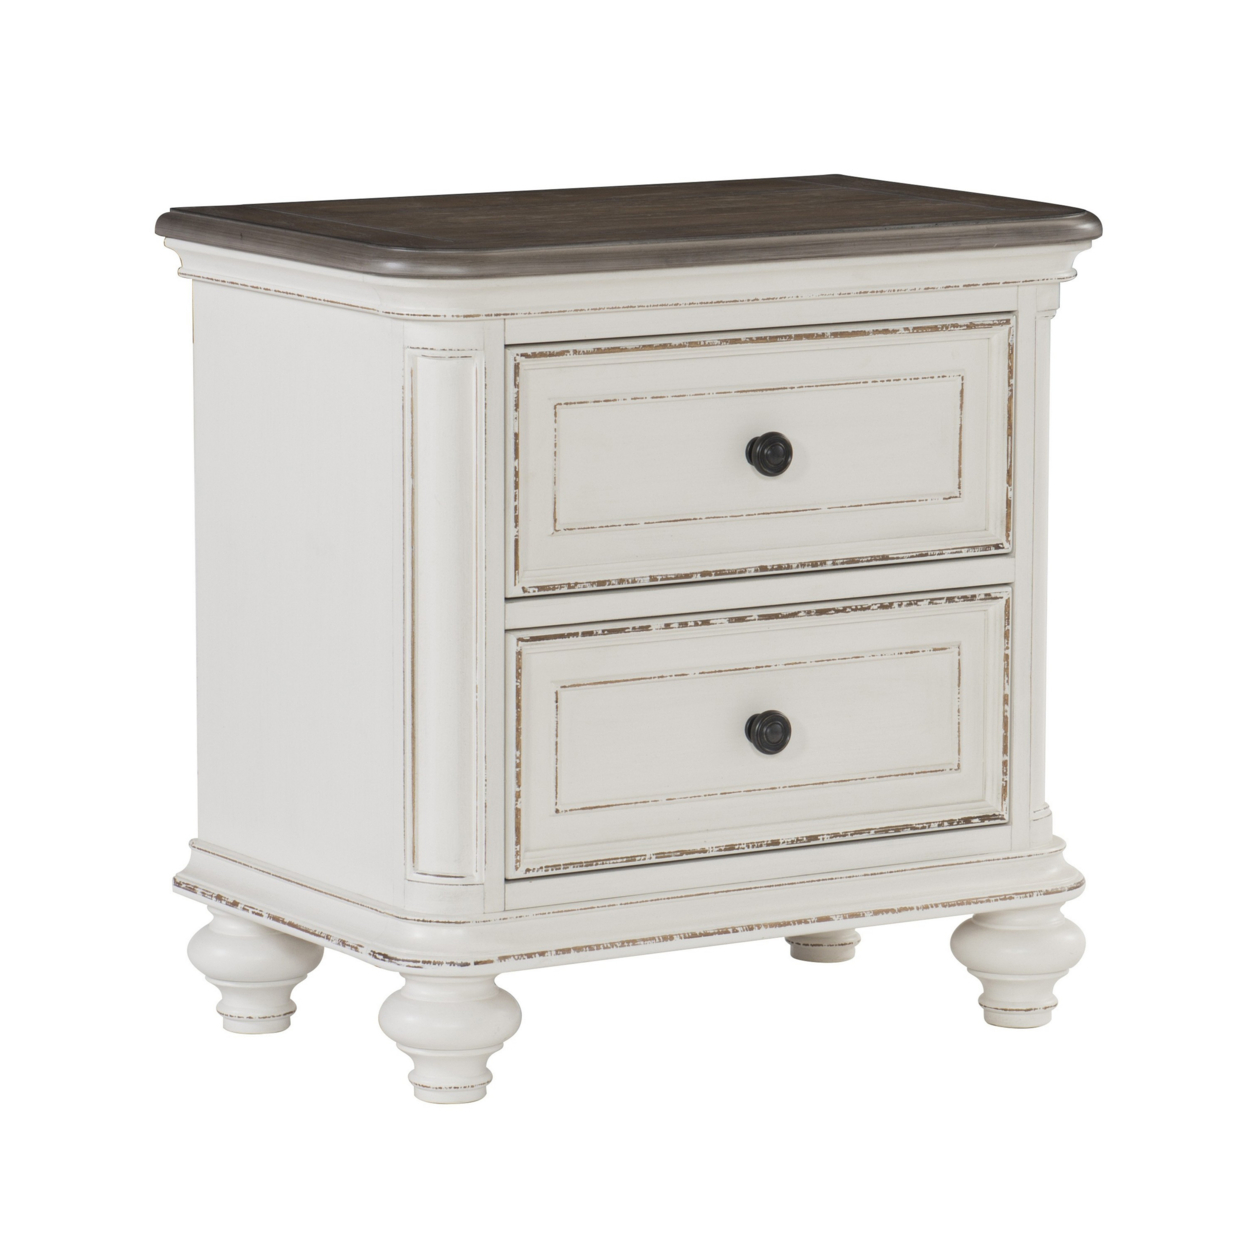 2 Drawer Wooden Nightstand With Distressed Details, Antique White And Brown- Saltoro Sherpi